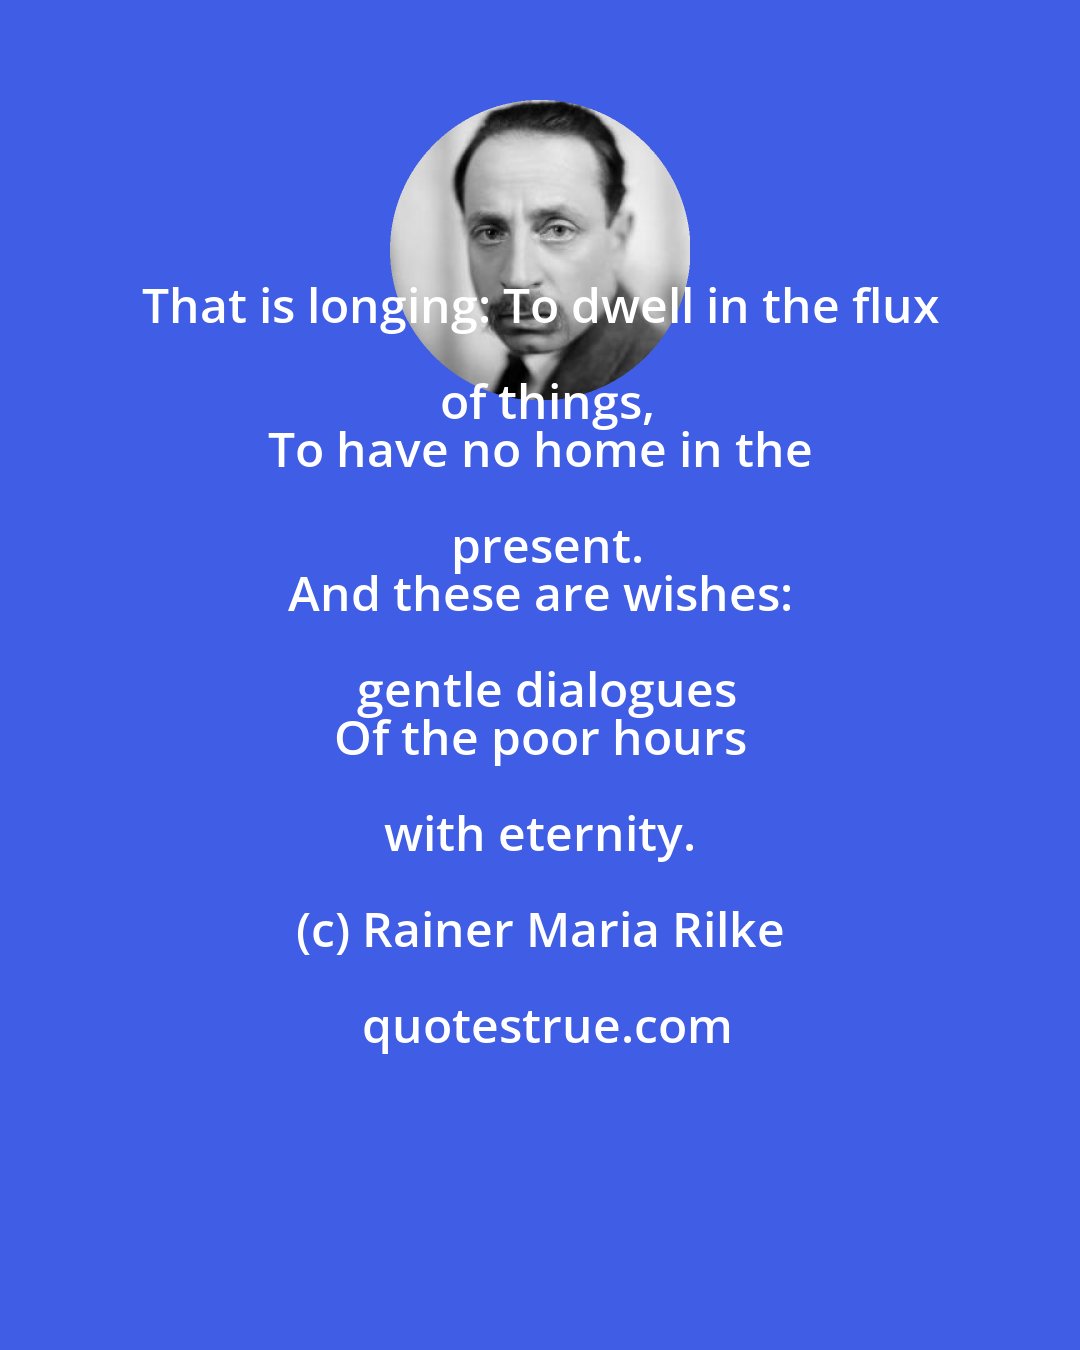 Rainer Maria Rilke: That is longing: To dwell in the flux of things,
 To have no home in the present.
 And these are wishes: gentle dialogues
 Of the poor hours with eternity.